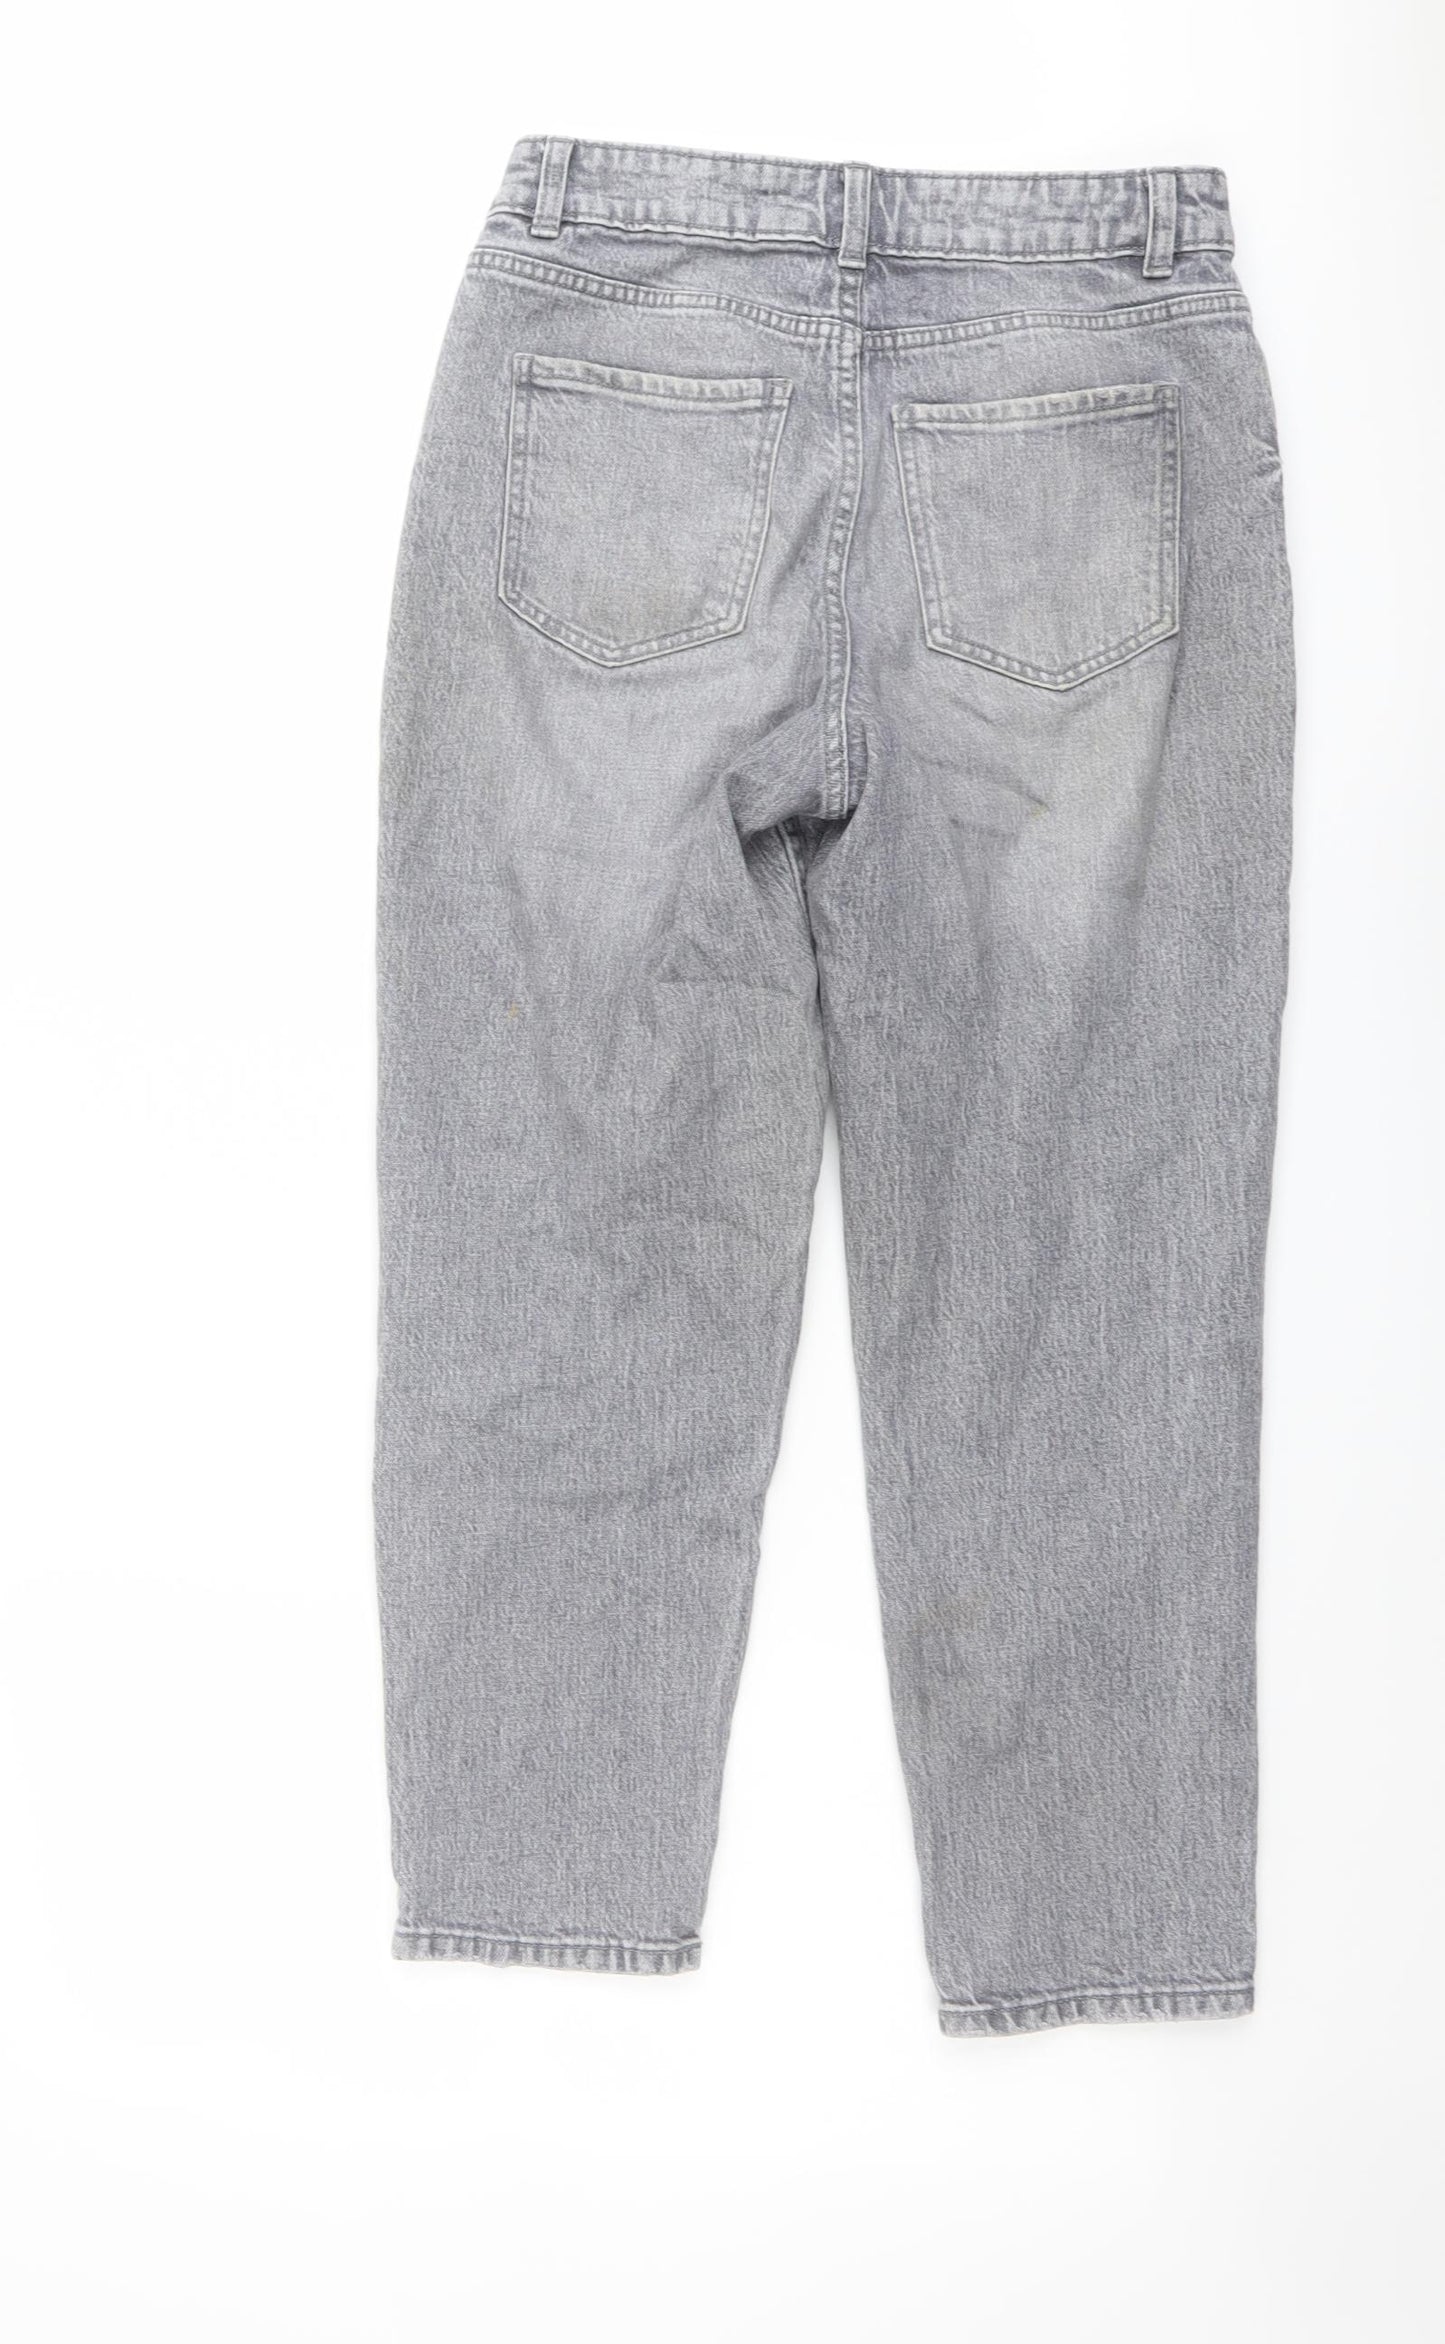 New Look Womens Grey Cotton Mom Jeans Size 8 L24 in Regular Button